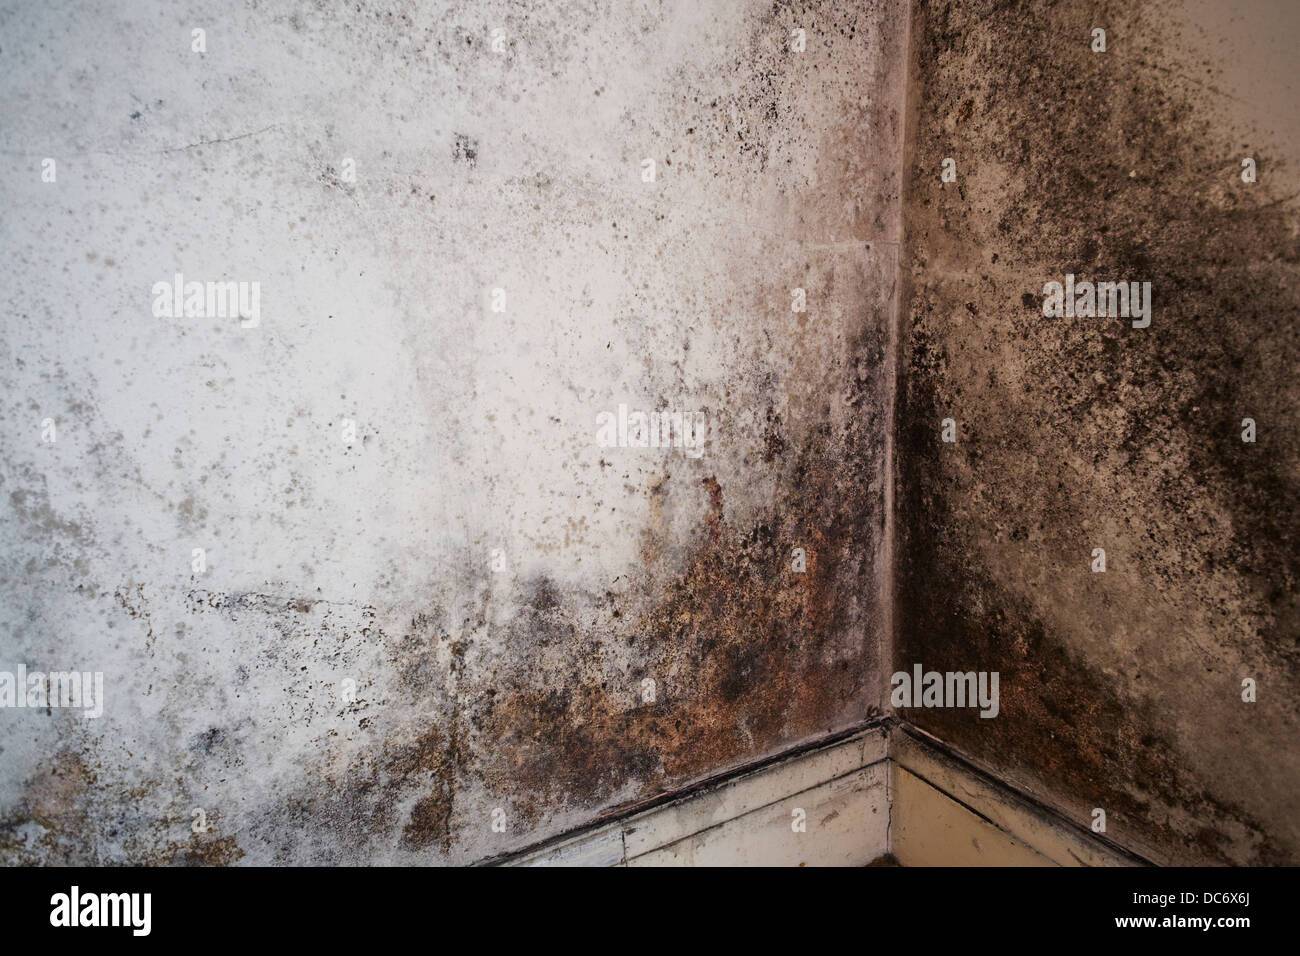 Mould on an interior room wall in a house England UK Stock Photo